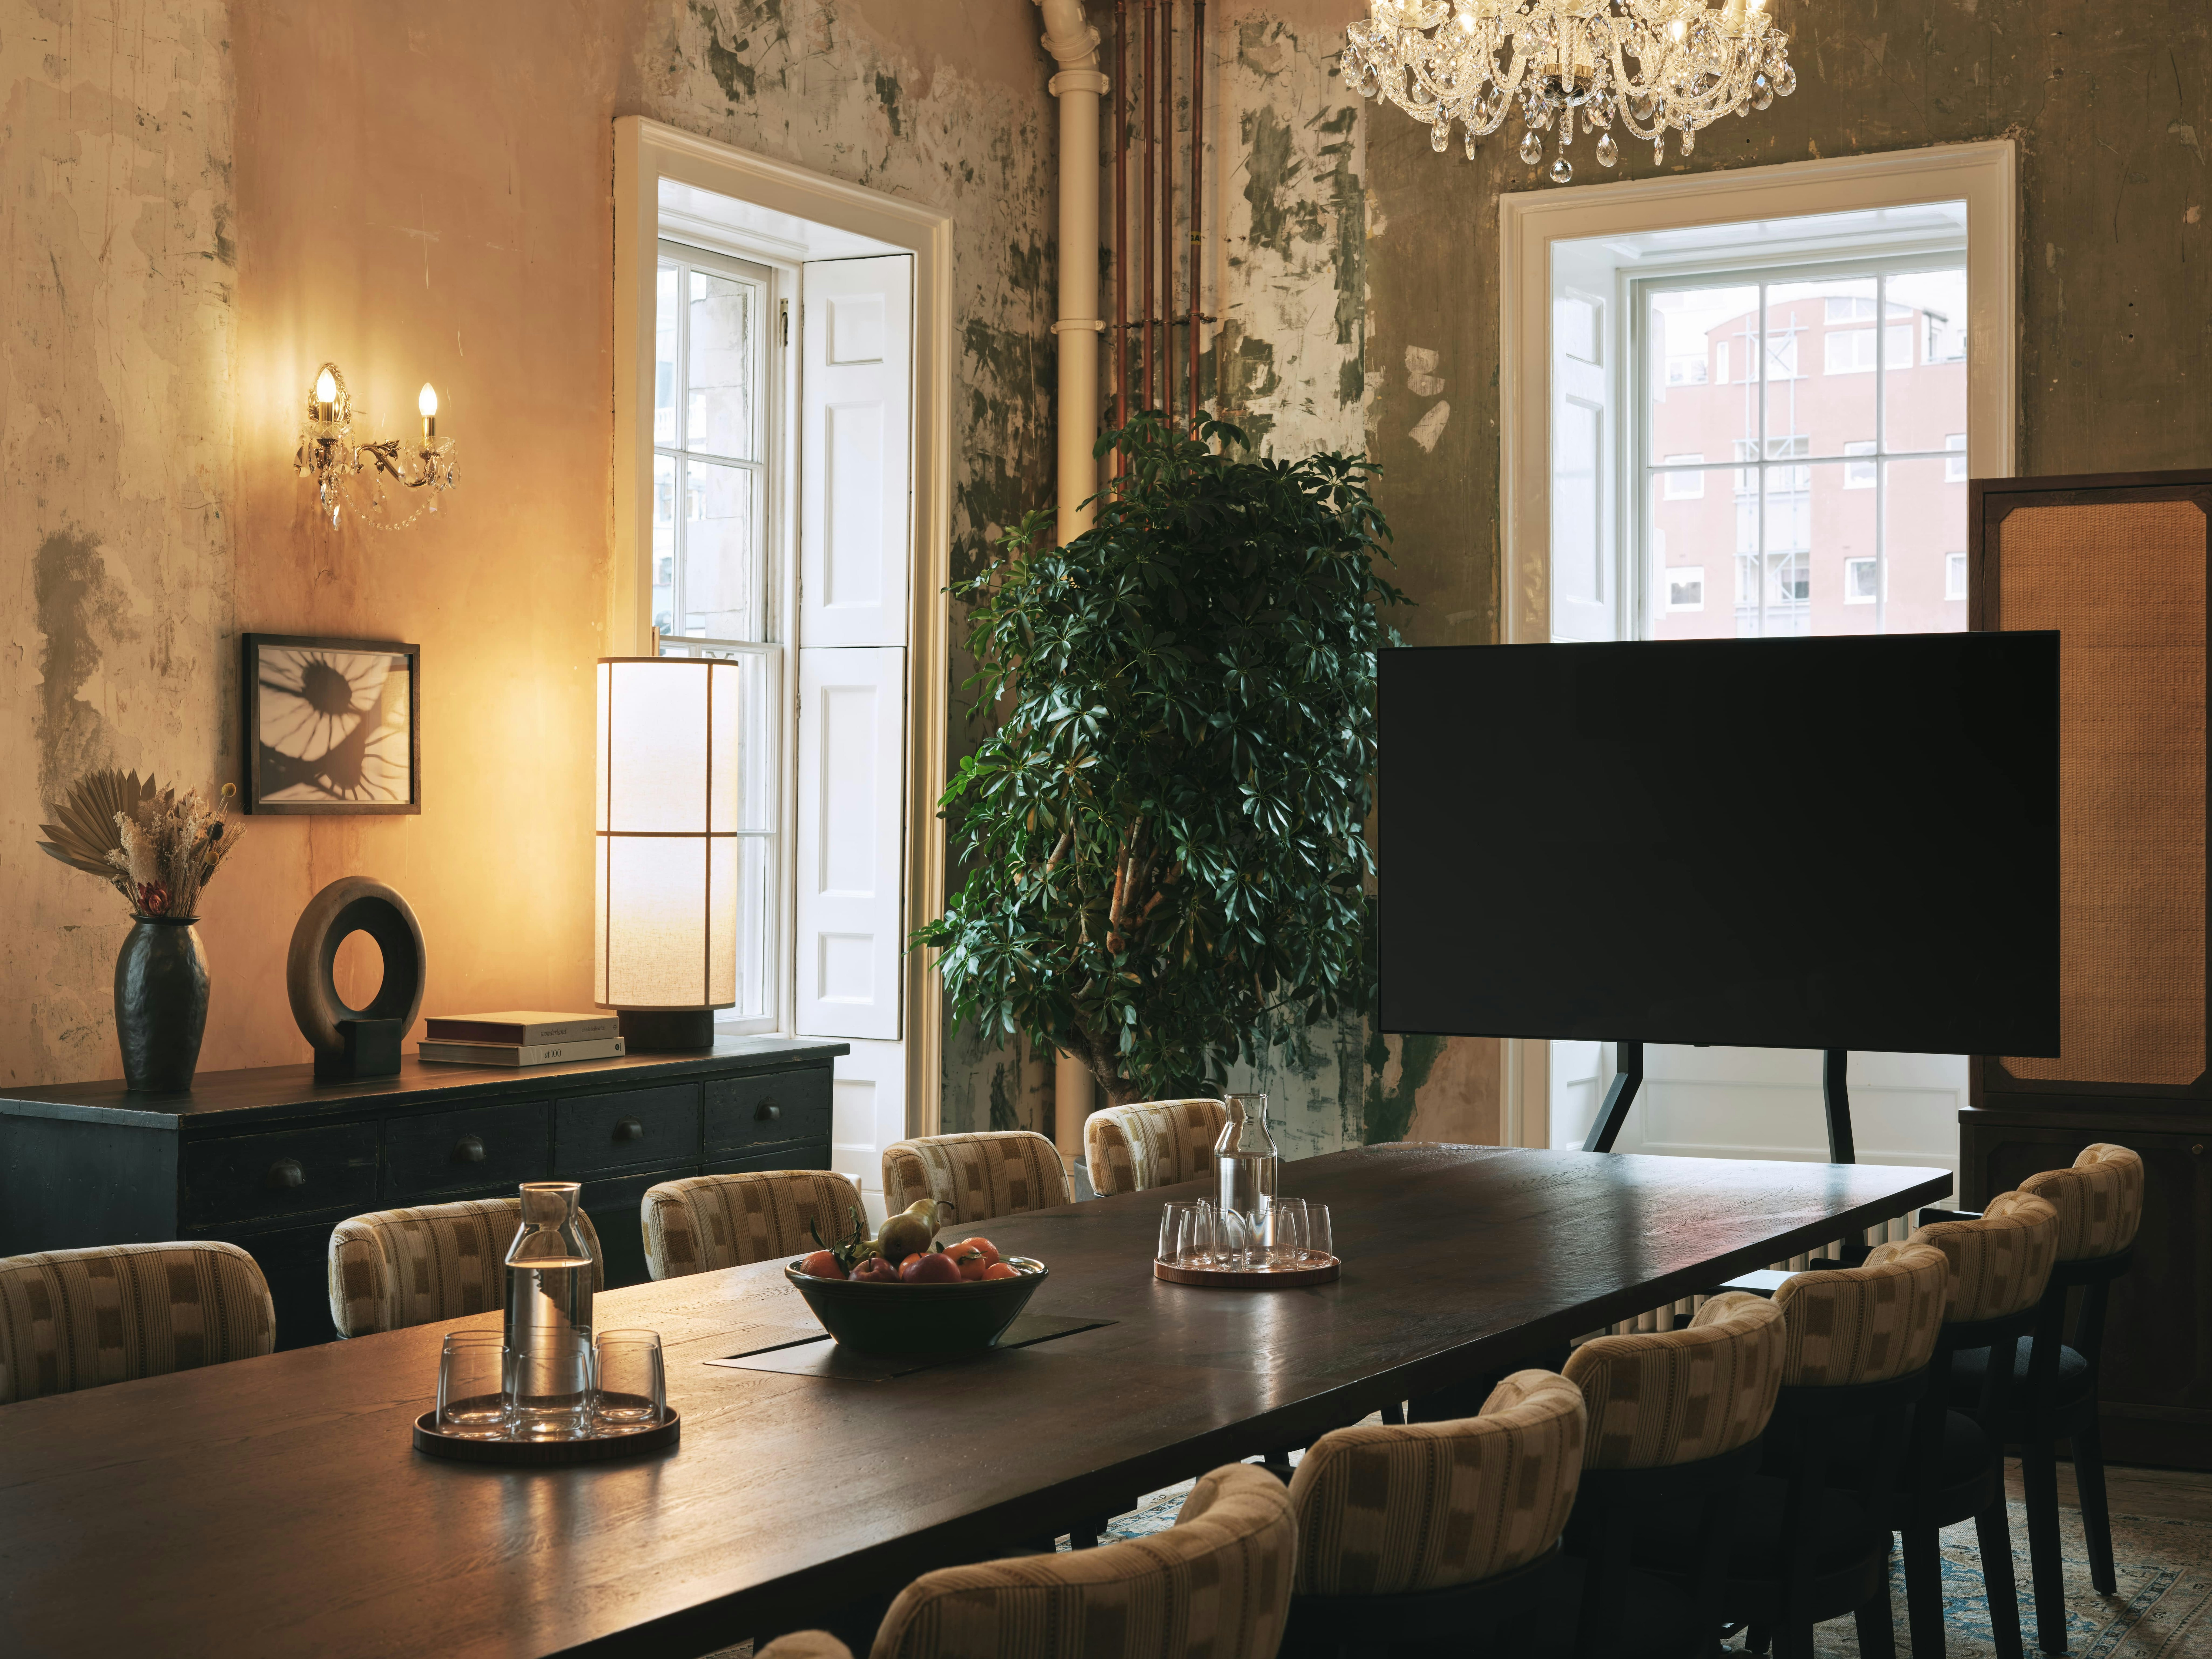 Knotel Workclub at Old Sessions House - Chairman's Room image 1